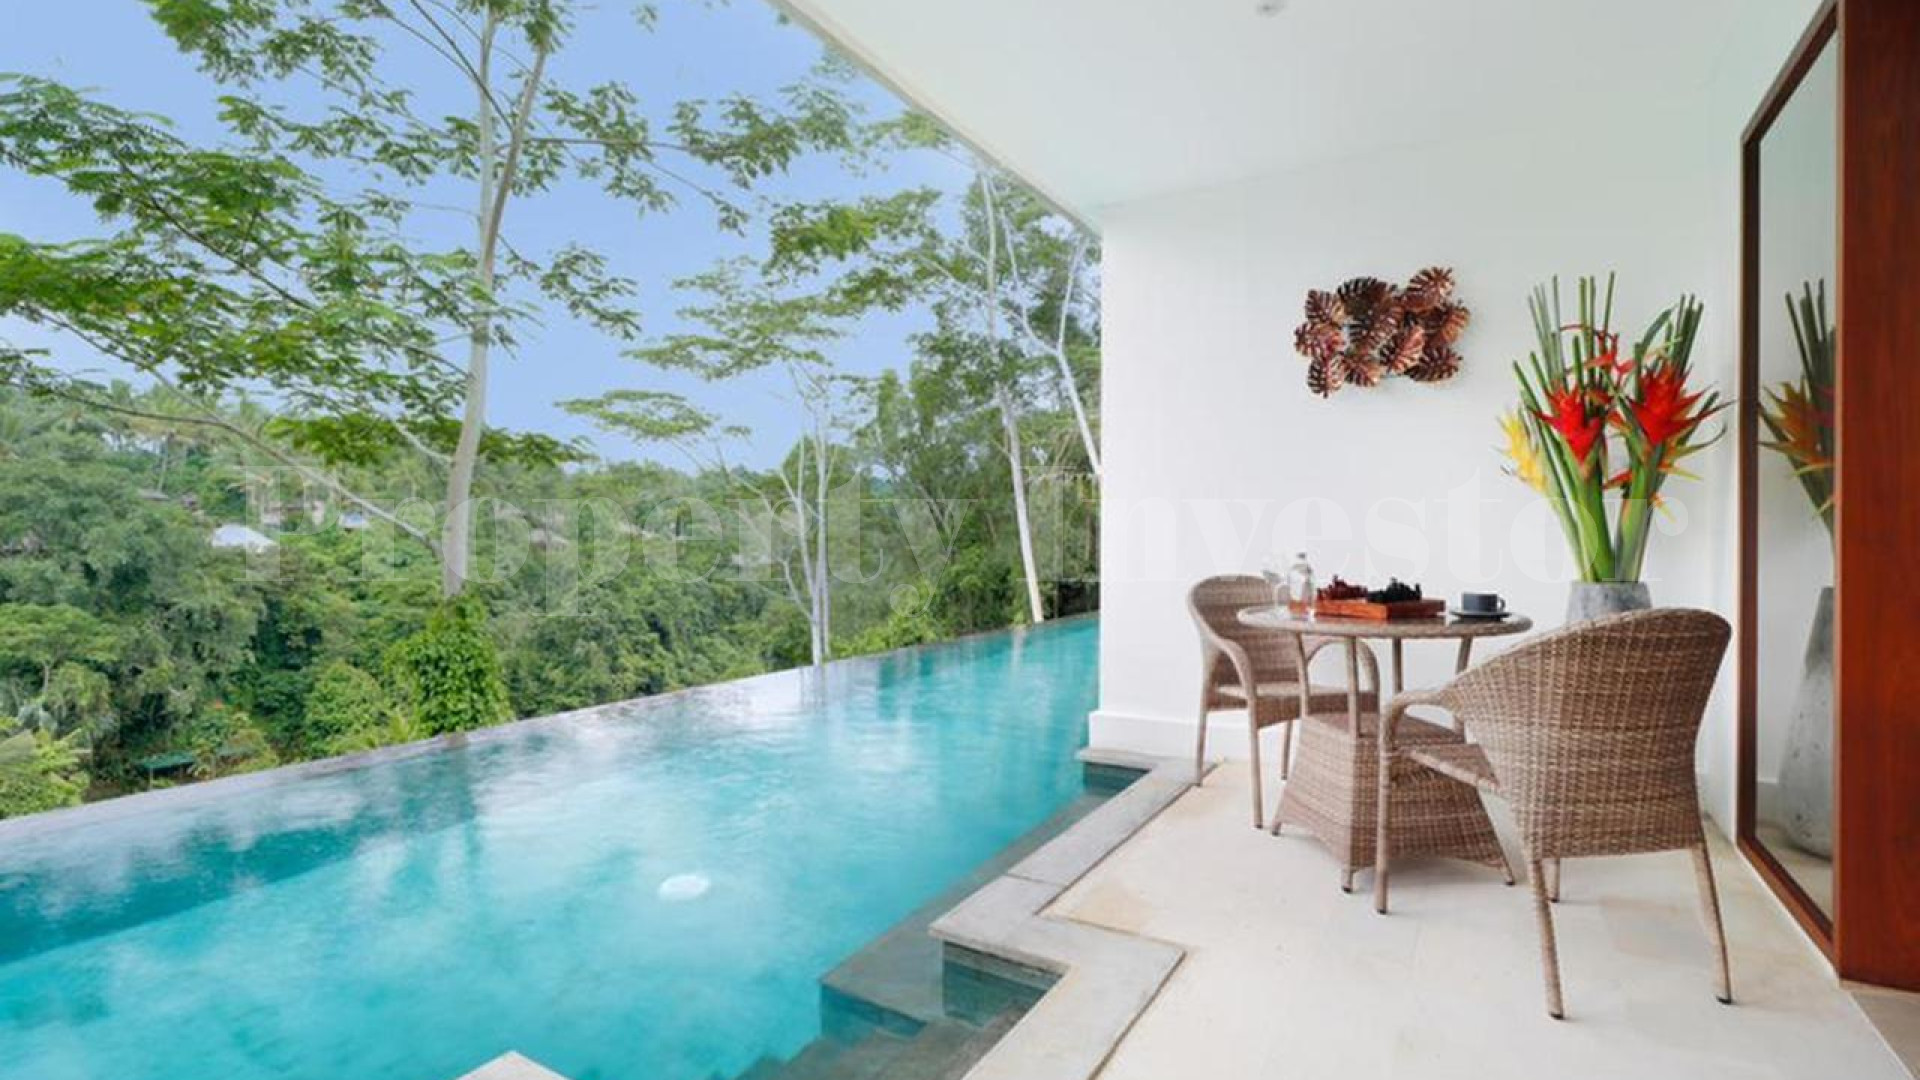 18 Bedroom 4* Star Boutique Hotel & Retreat with Unbelievable Jungle View Infinity Pool for Sale in East Ubud, Bali